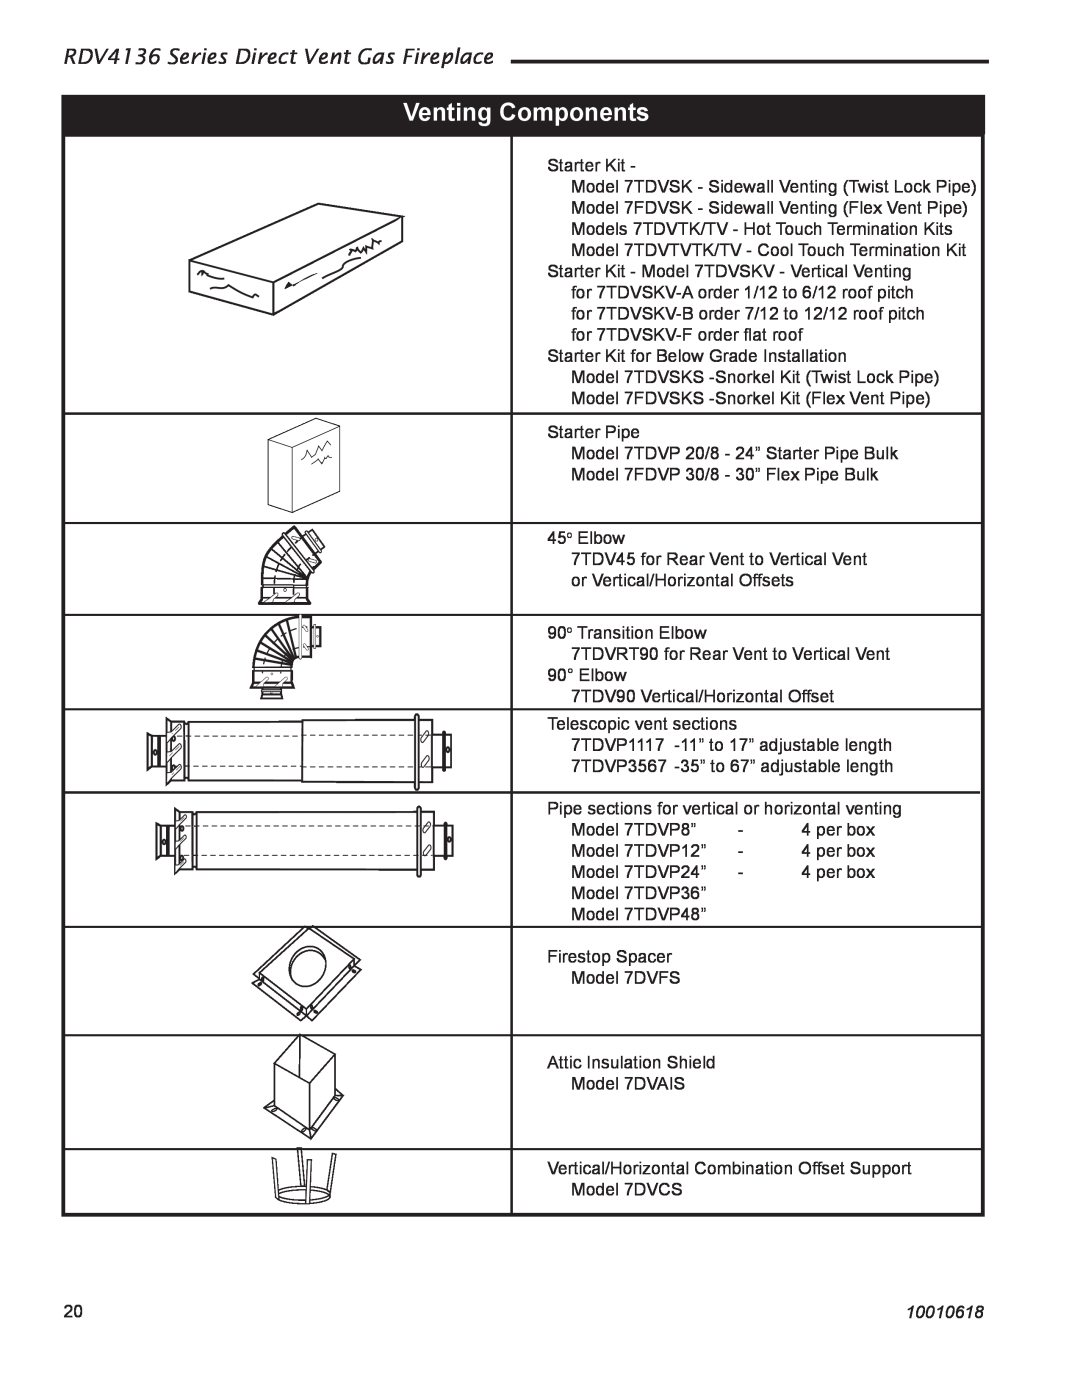 Majestic Appliances installation instructions Venting Components, RDV4136 Series Direct Vent Gas Fireplace, 10010618 